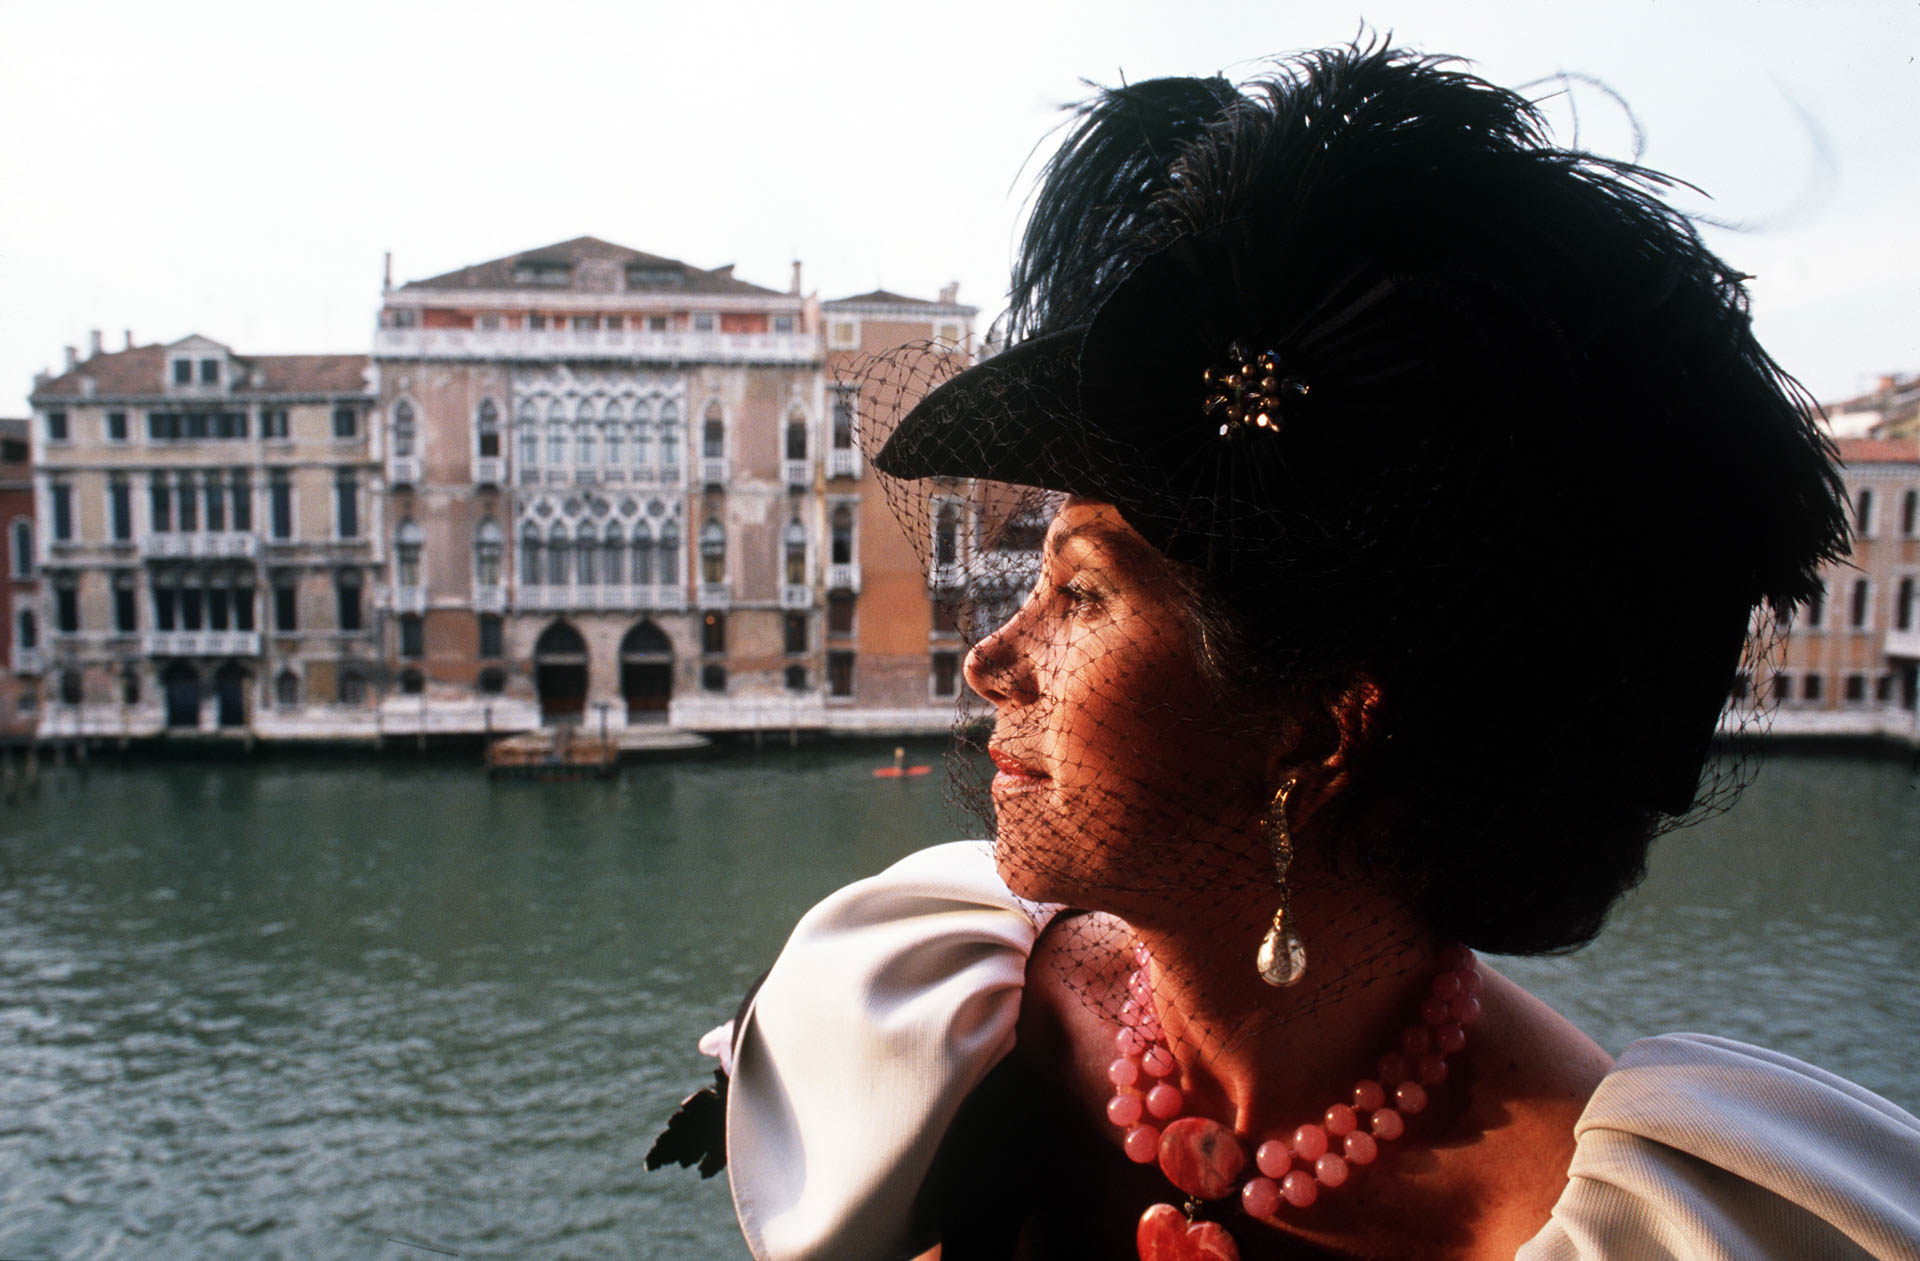  Venice, Italy - March 1988 
Countess Lucia Zauagli in her palace on the Canal Grande: in Venice her parties at "Carnevale" time have become very famous.
© GIANNI GIANSANTI 